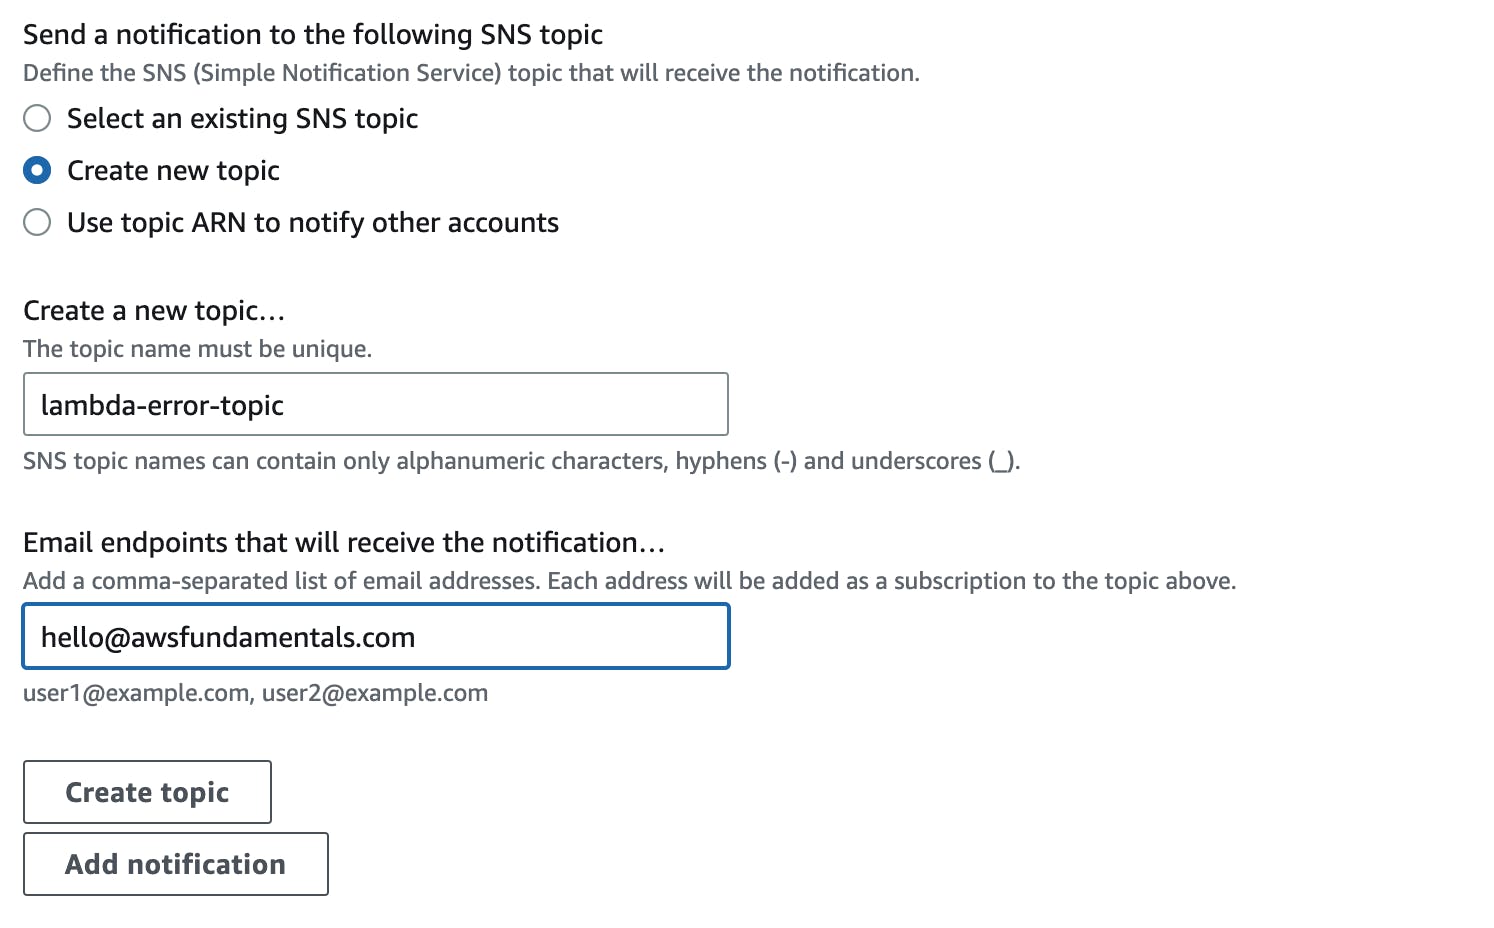 Create a new SNS topic in CloudWatch Alarm and send email to us